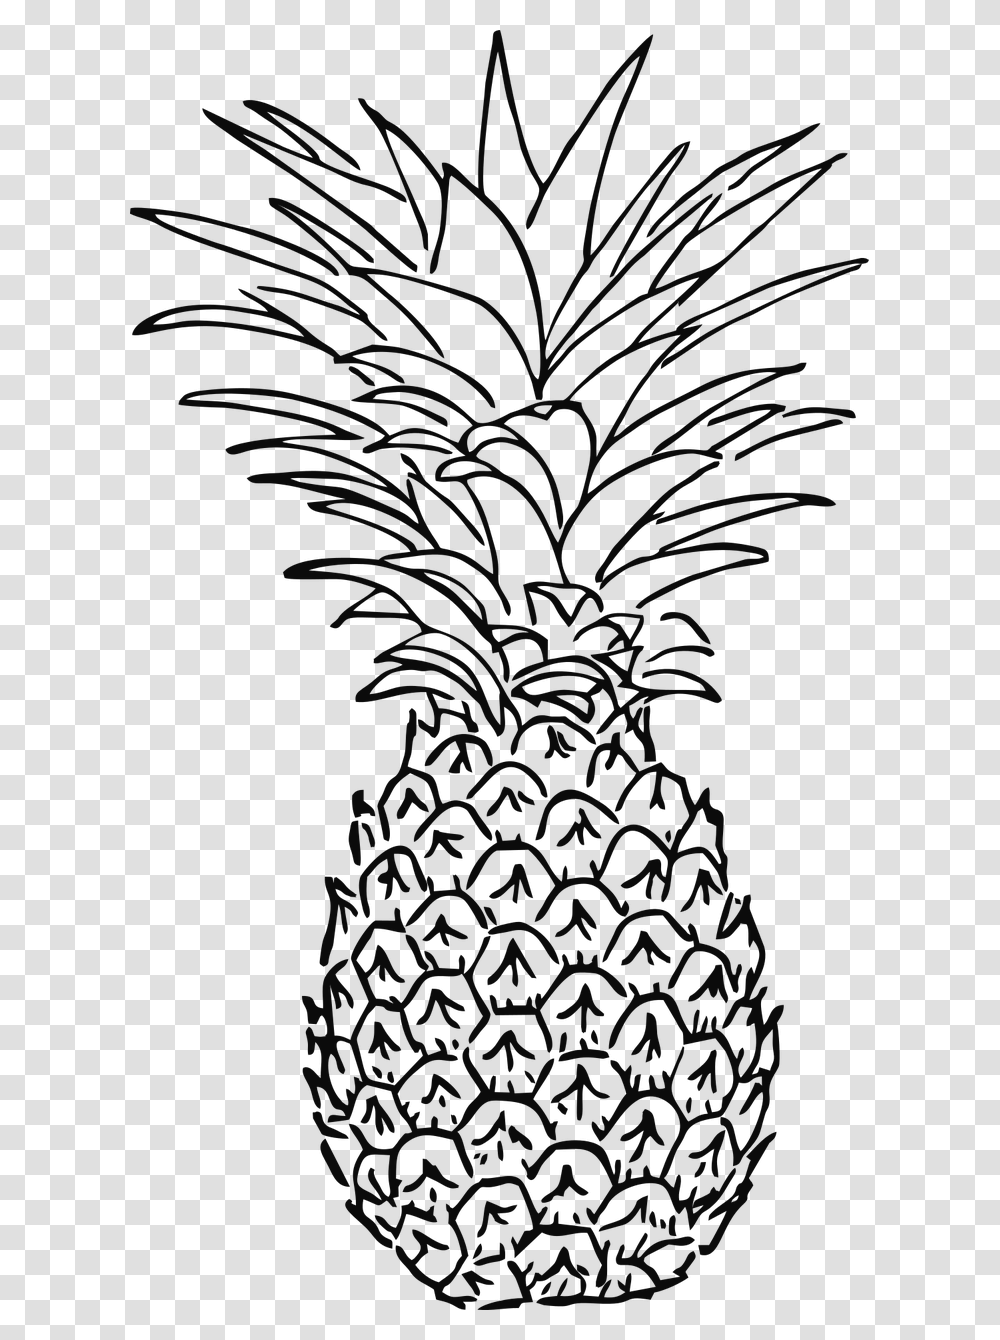 Pineapple Black And White, Nature, Outdoors, Sea, Water Transparent Png